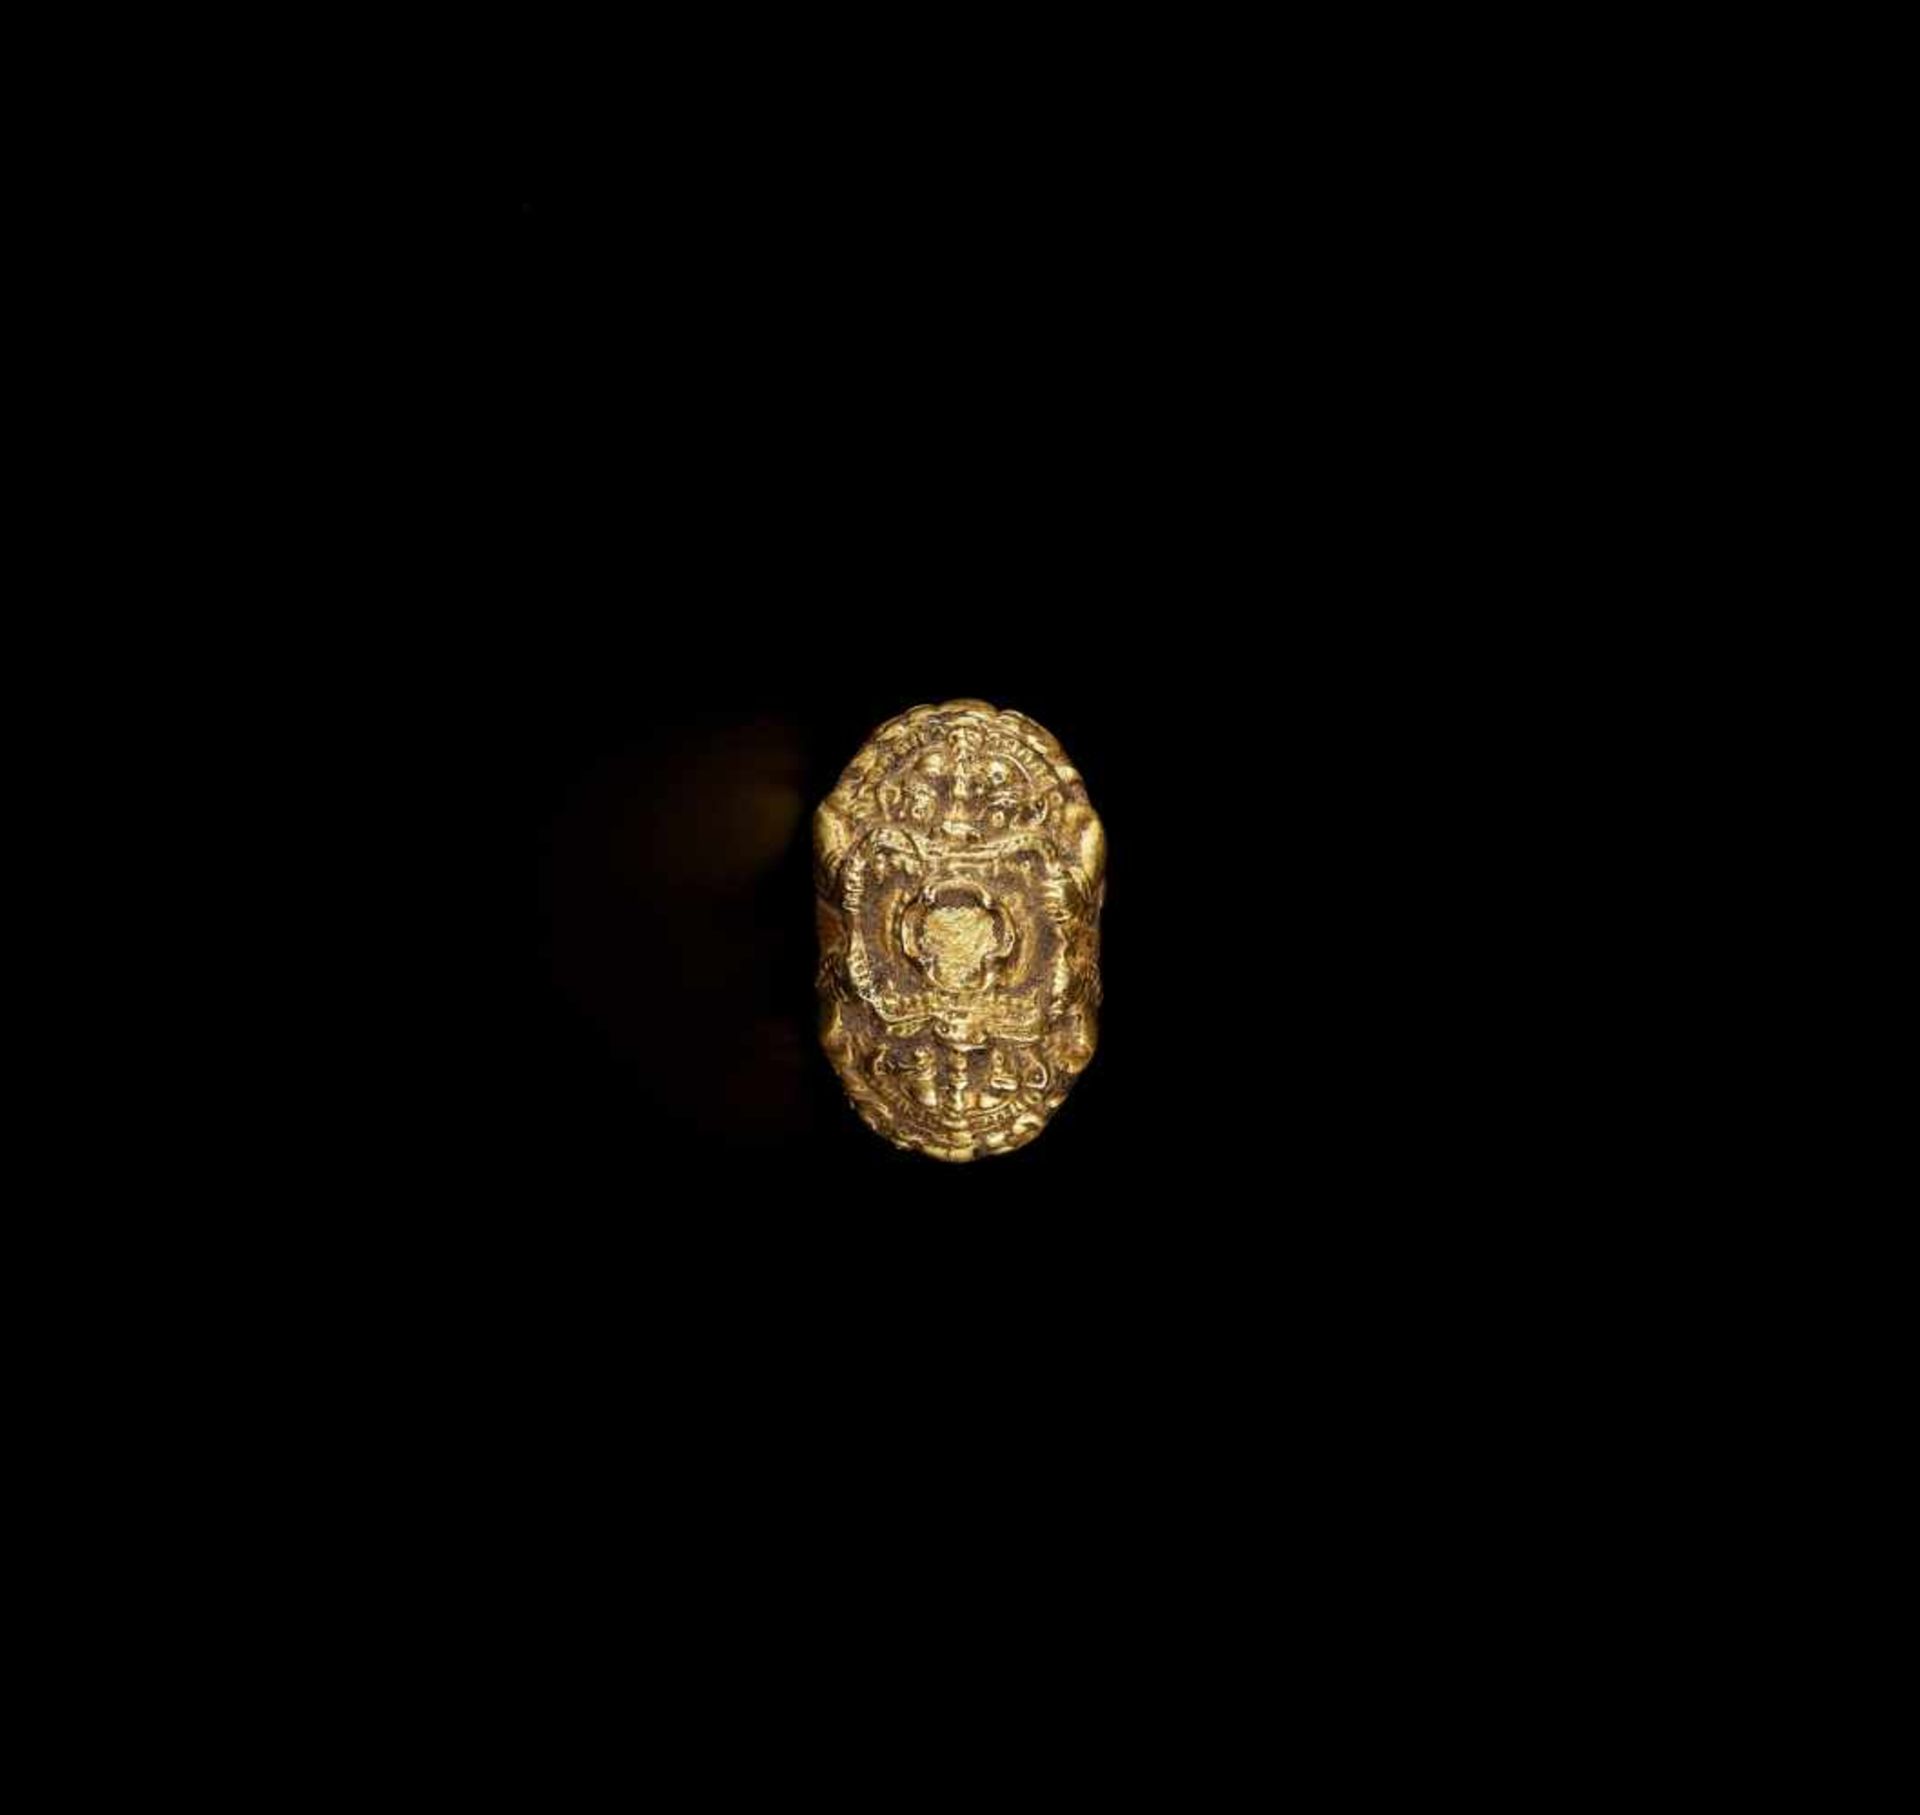 A MASSIVE GOLD RING DEPICTING KALA South Vietnam, 20th century. The top of the ring shows two